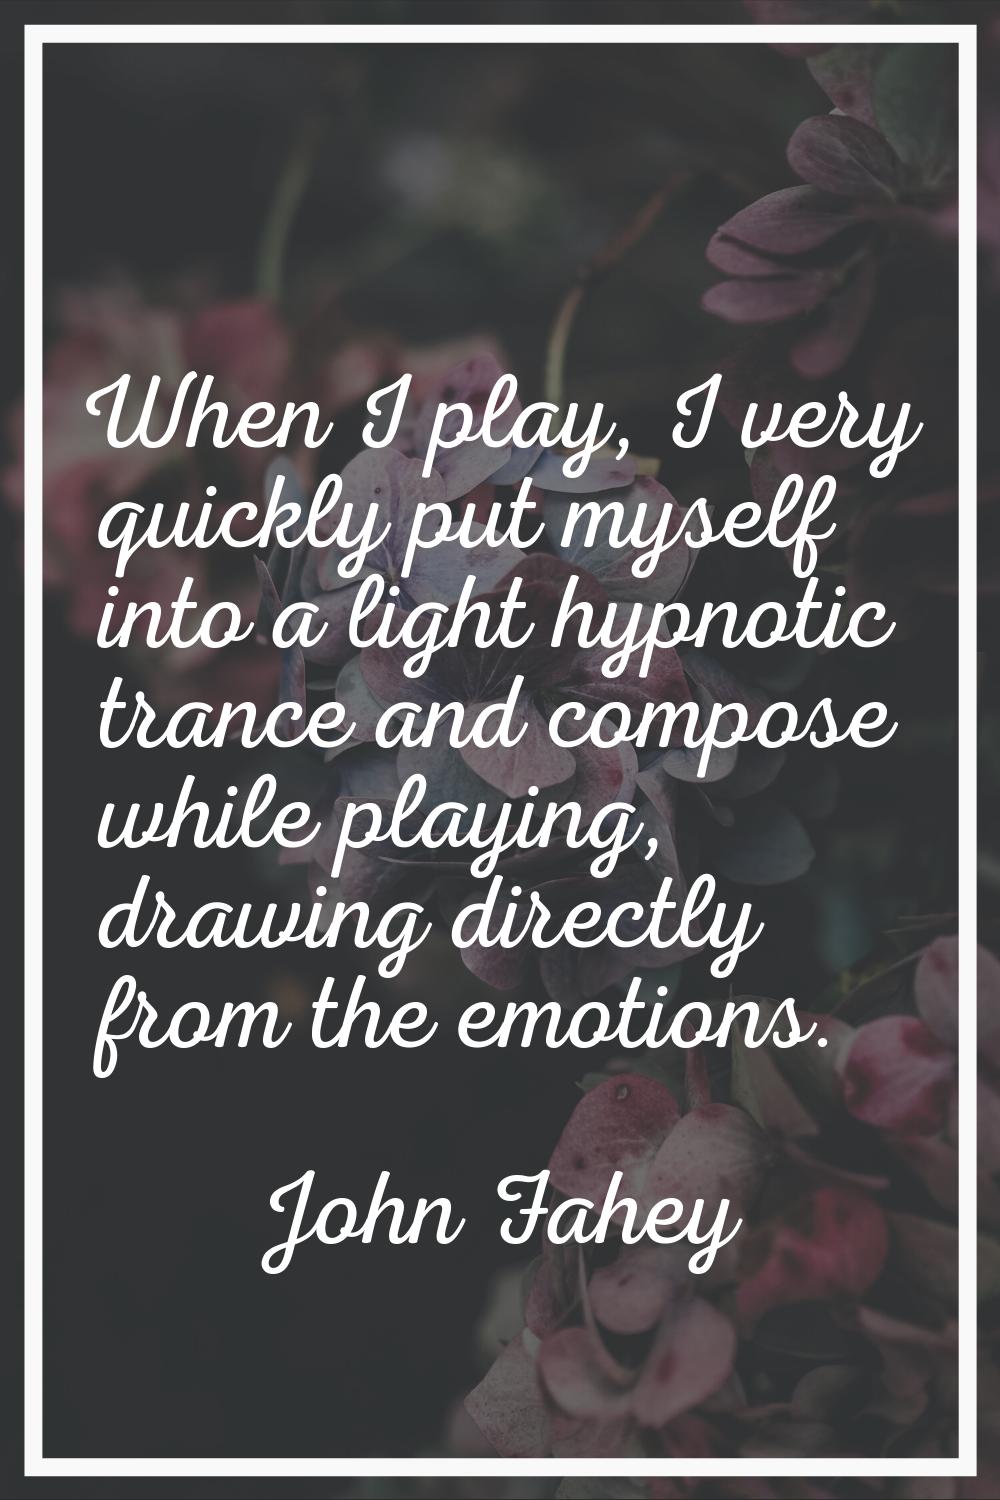 When I play, I very quickly put myself into a light hypnotic trance and compose while playing, draw